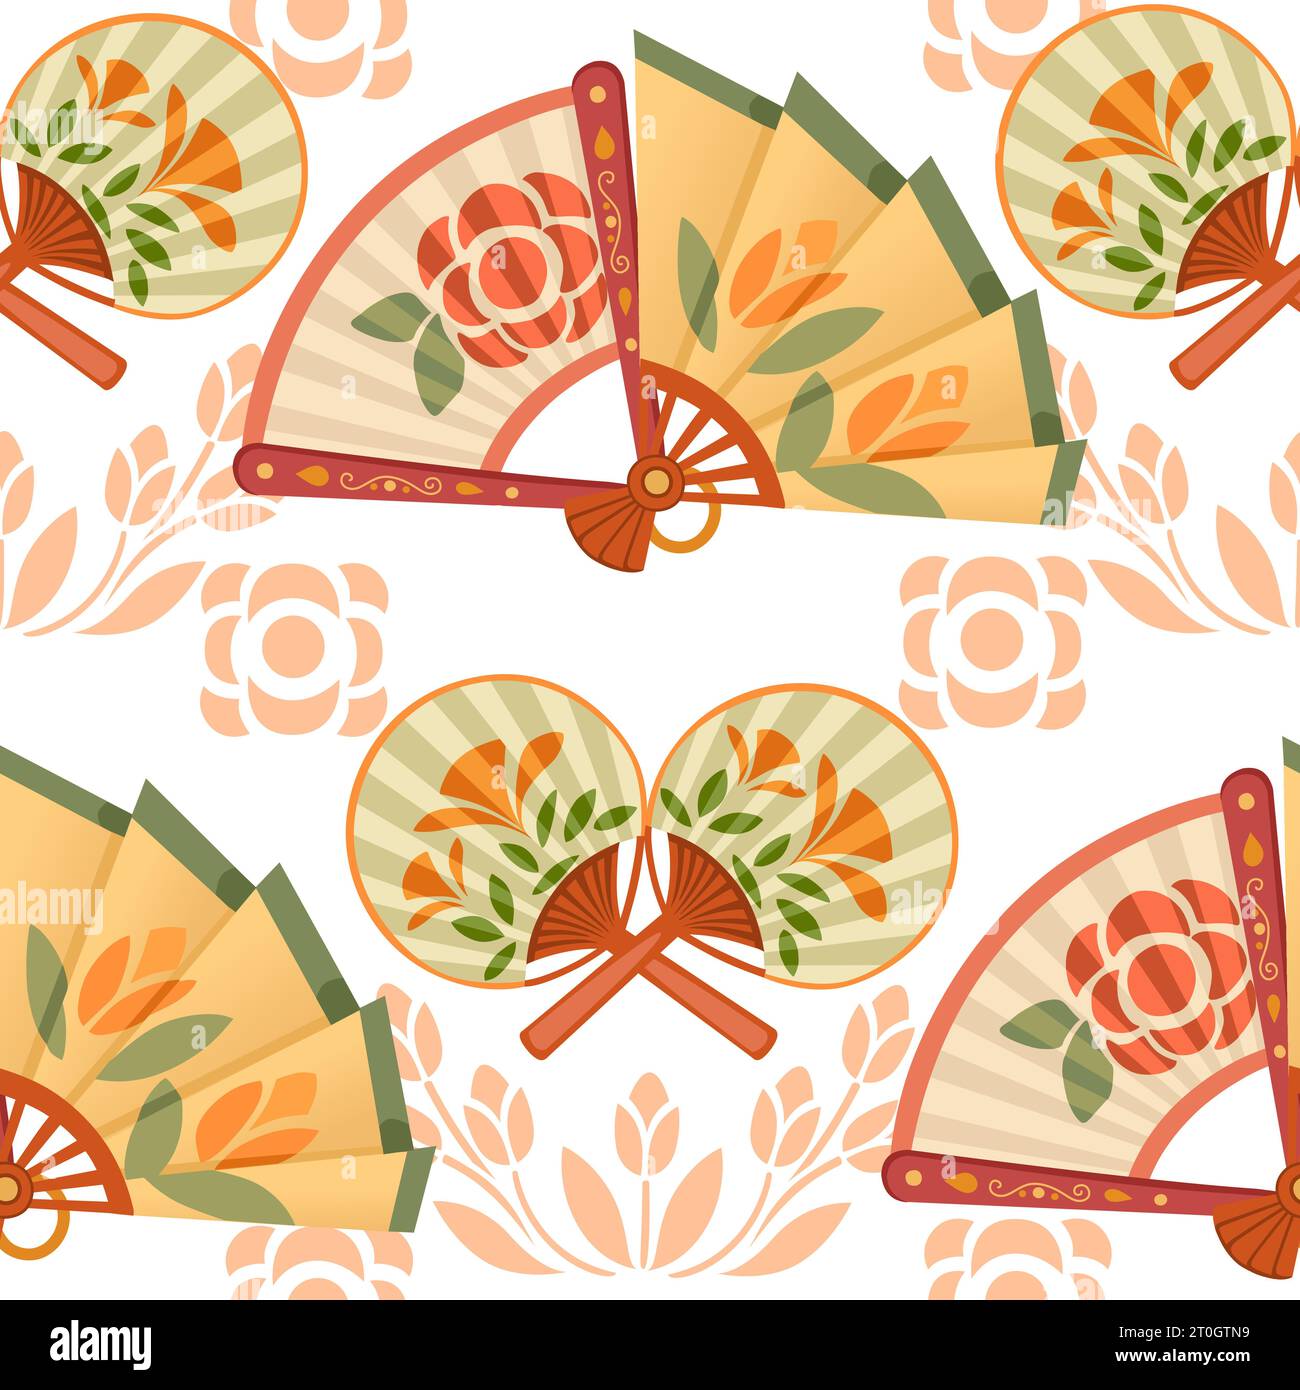 Seamless pattern classic asian style hand fan vector illustration Stock Vector